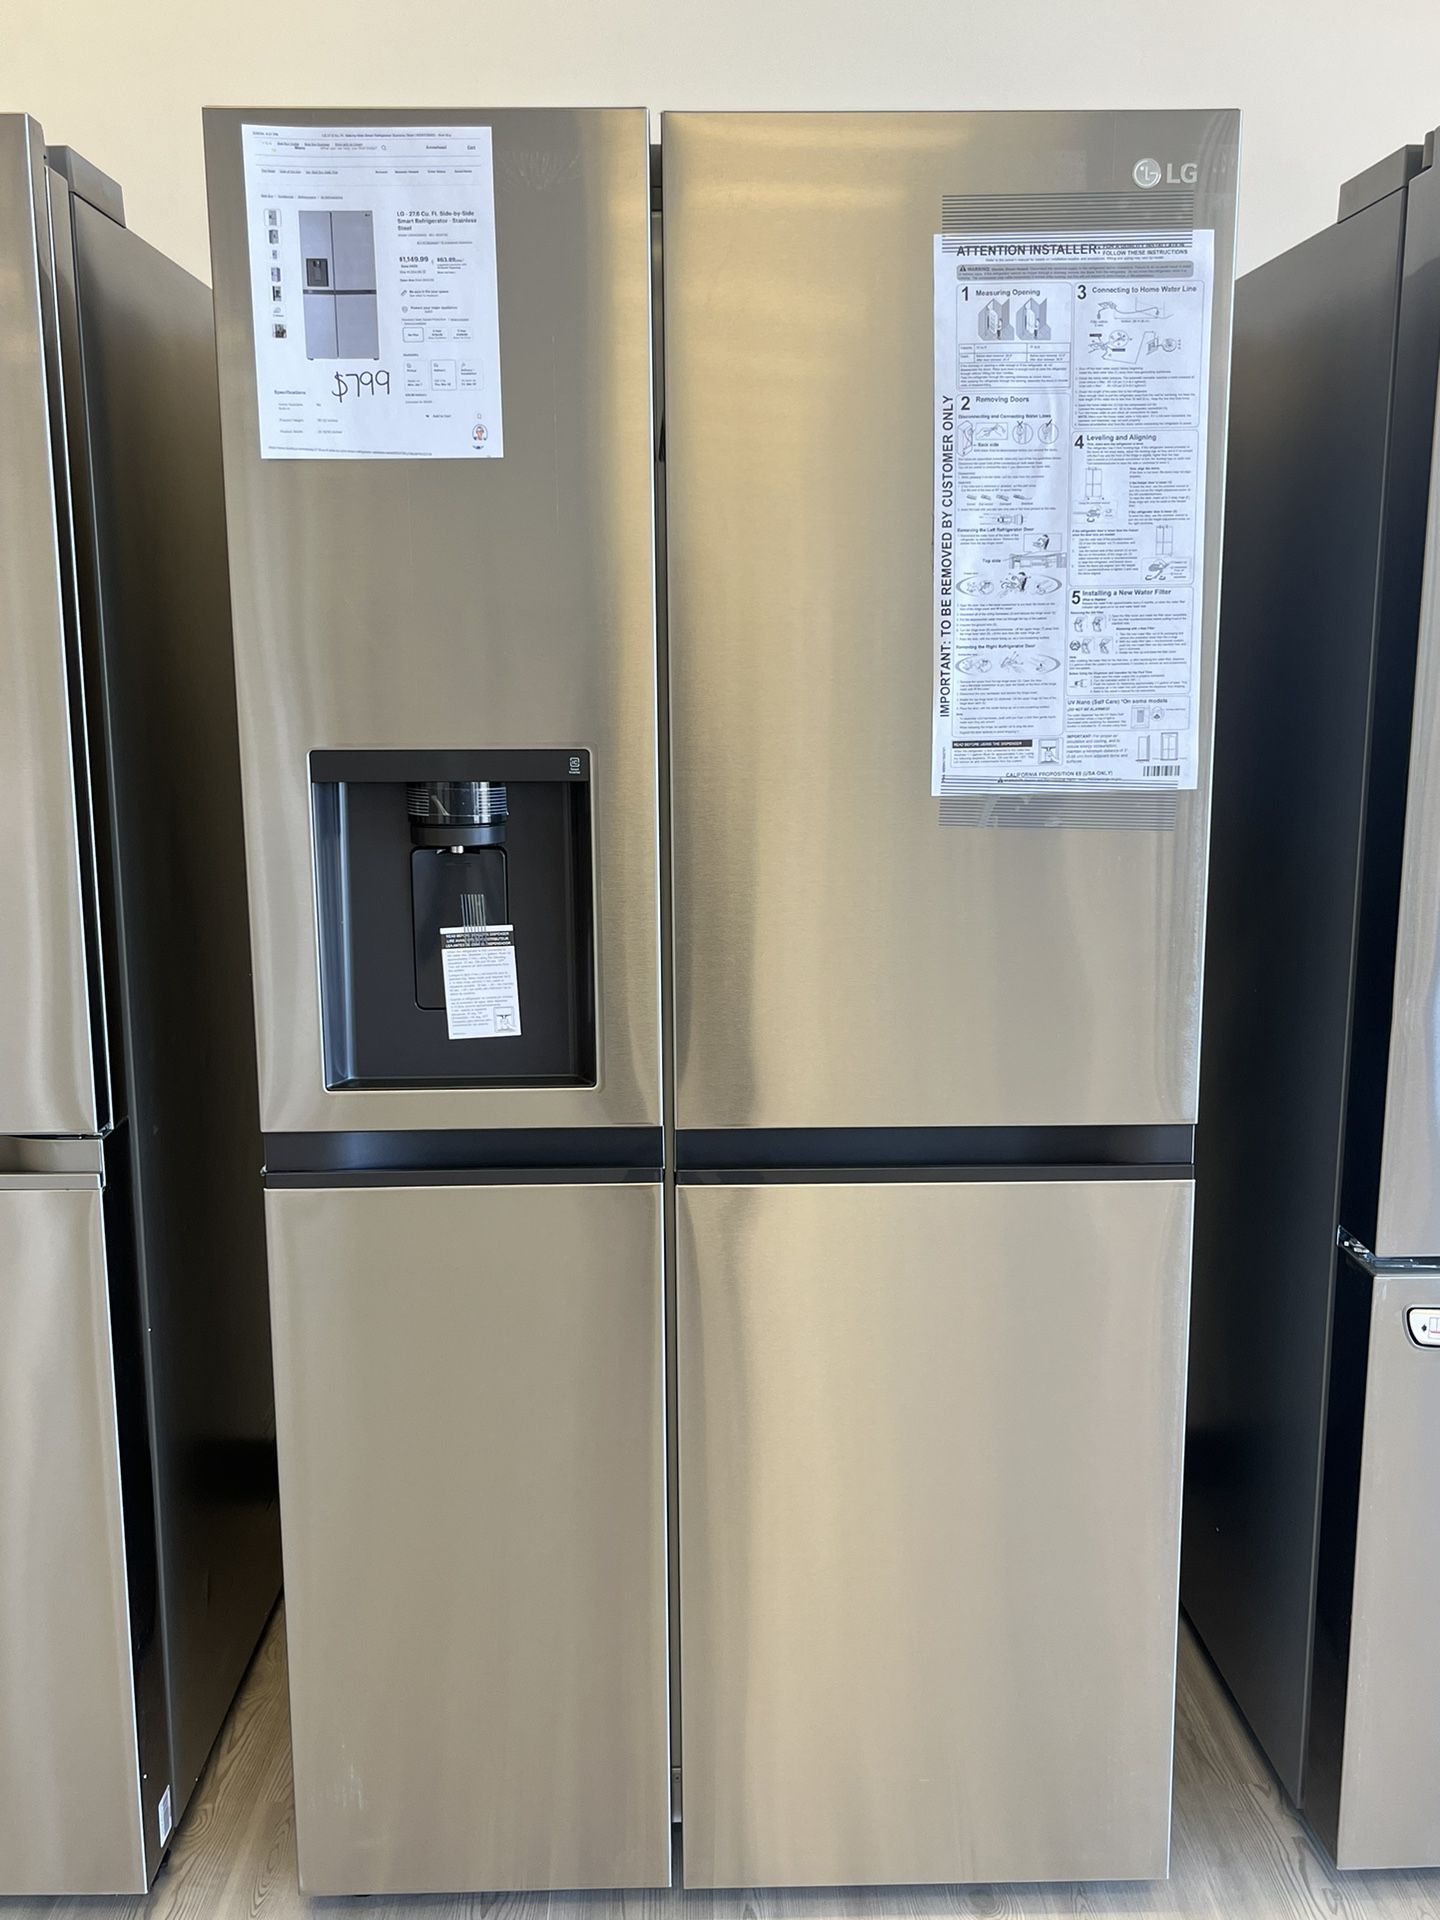 LG - 27.6 Cu. Ft. Side-by-Side Smart Refrigerator - Stainless Steel